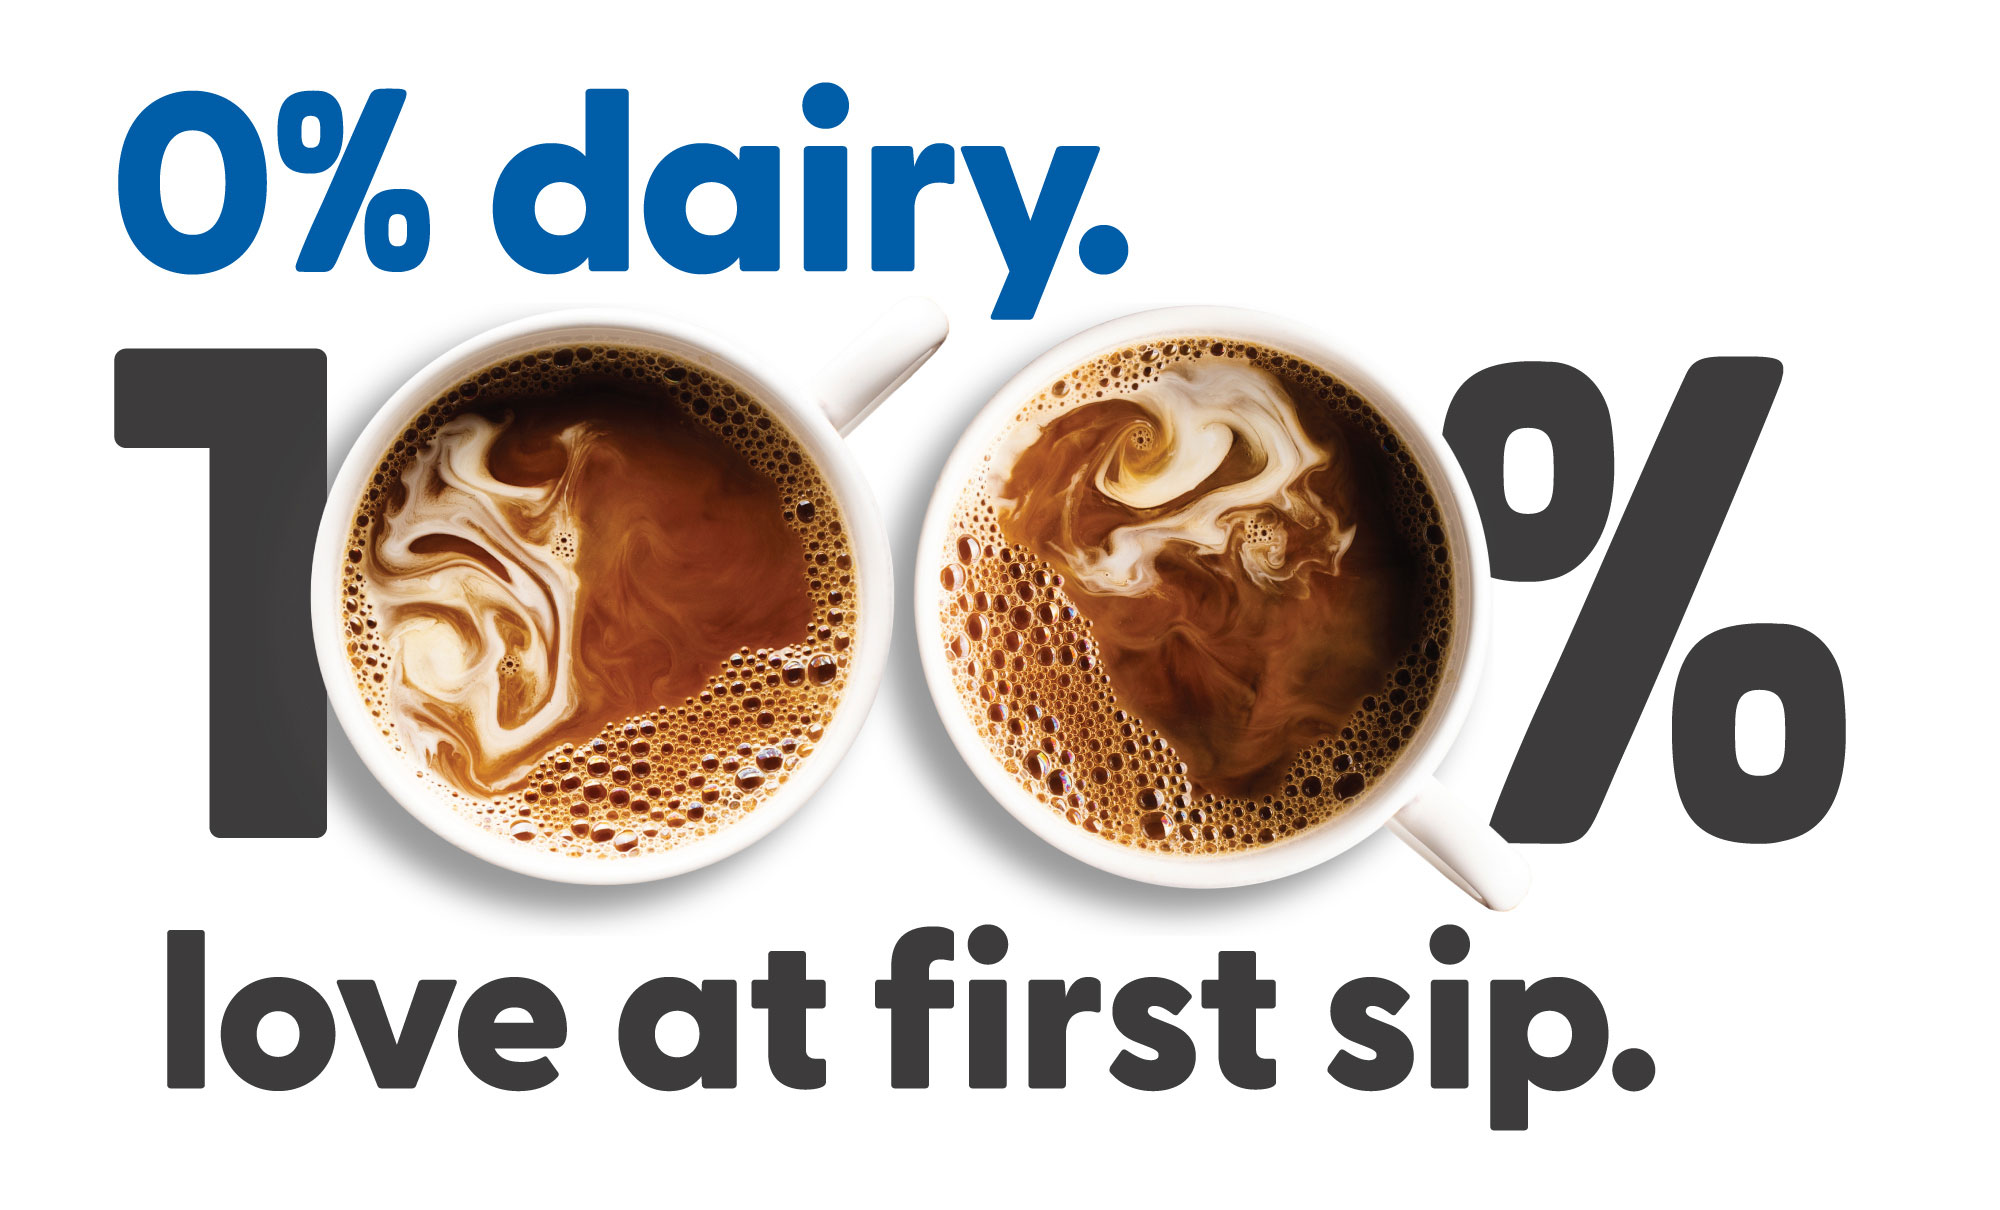 0% dairy. 100% love at first sip.